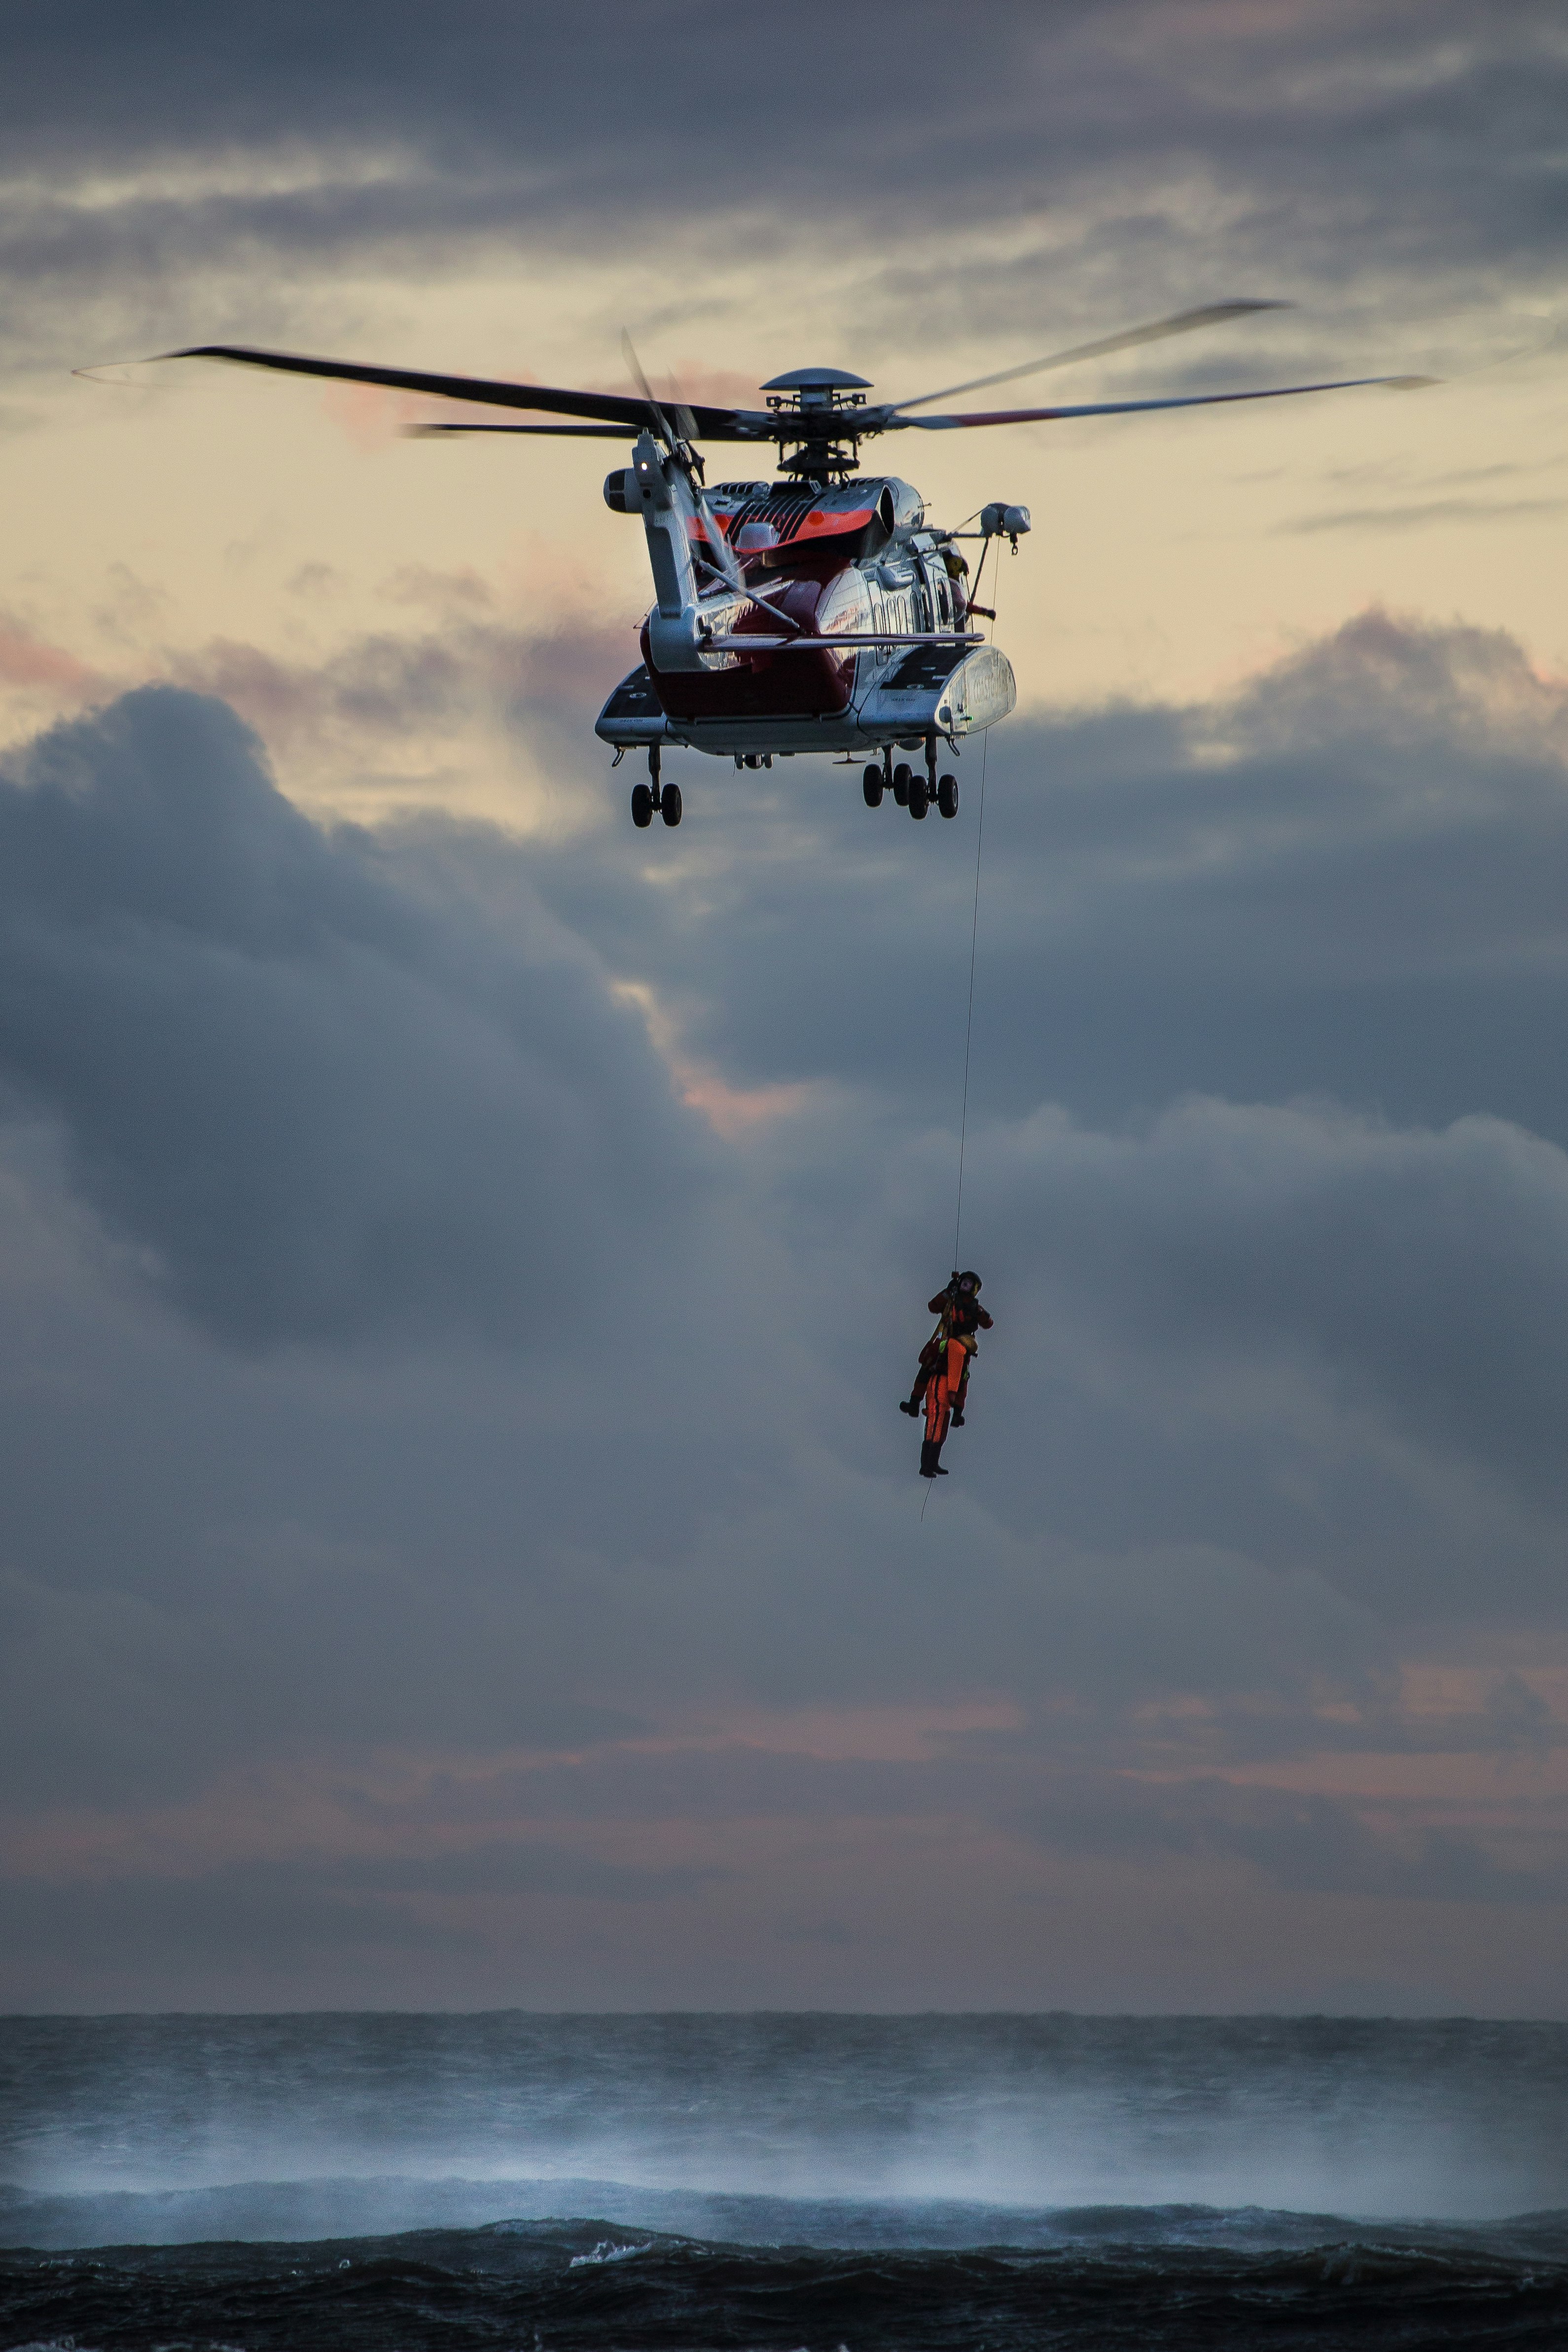 I went down to Dinas Dinlle beach near Caernarfon (North Wales) to try some long exposures of the waves and clouds. To my surprise a HM Coastguard training operation was taking place. In this photo you can see the winch-man and a dummy being lifted from the cold sea.